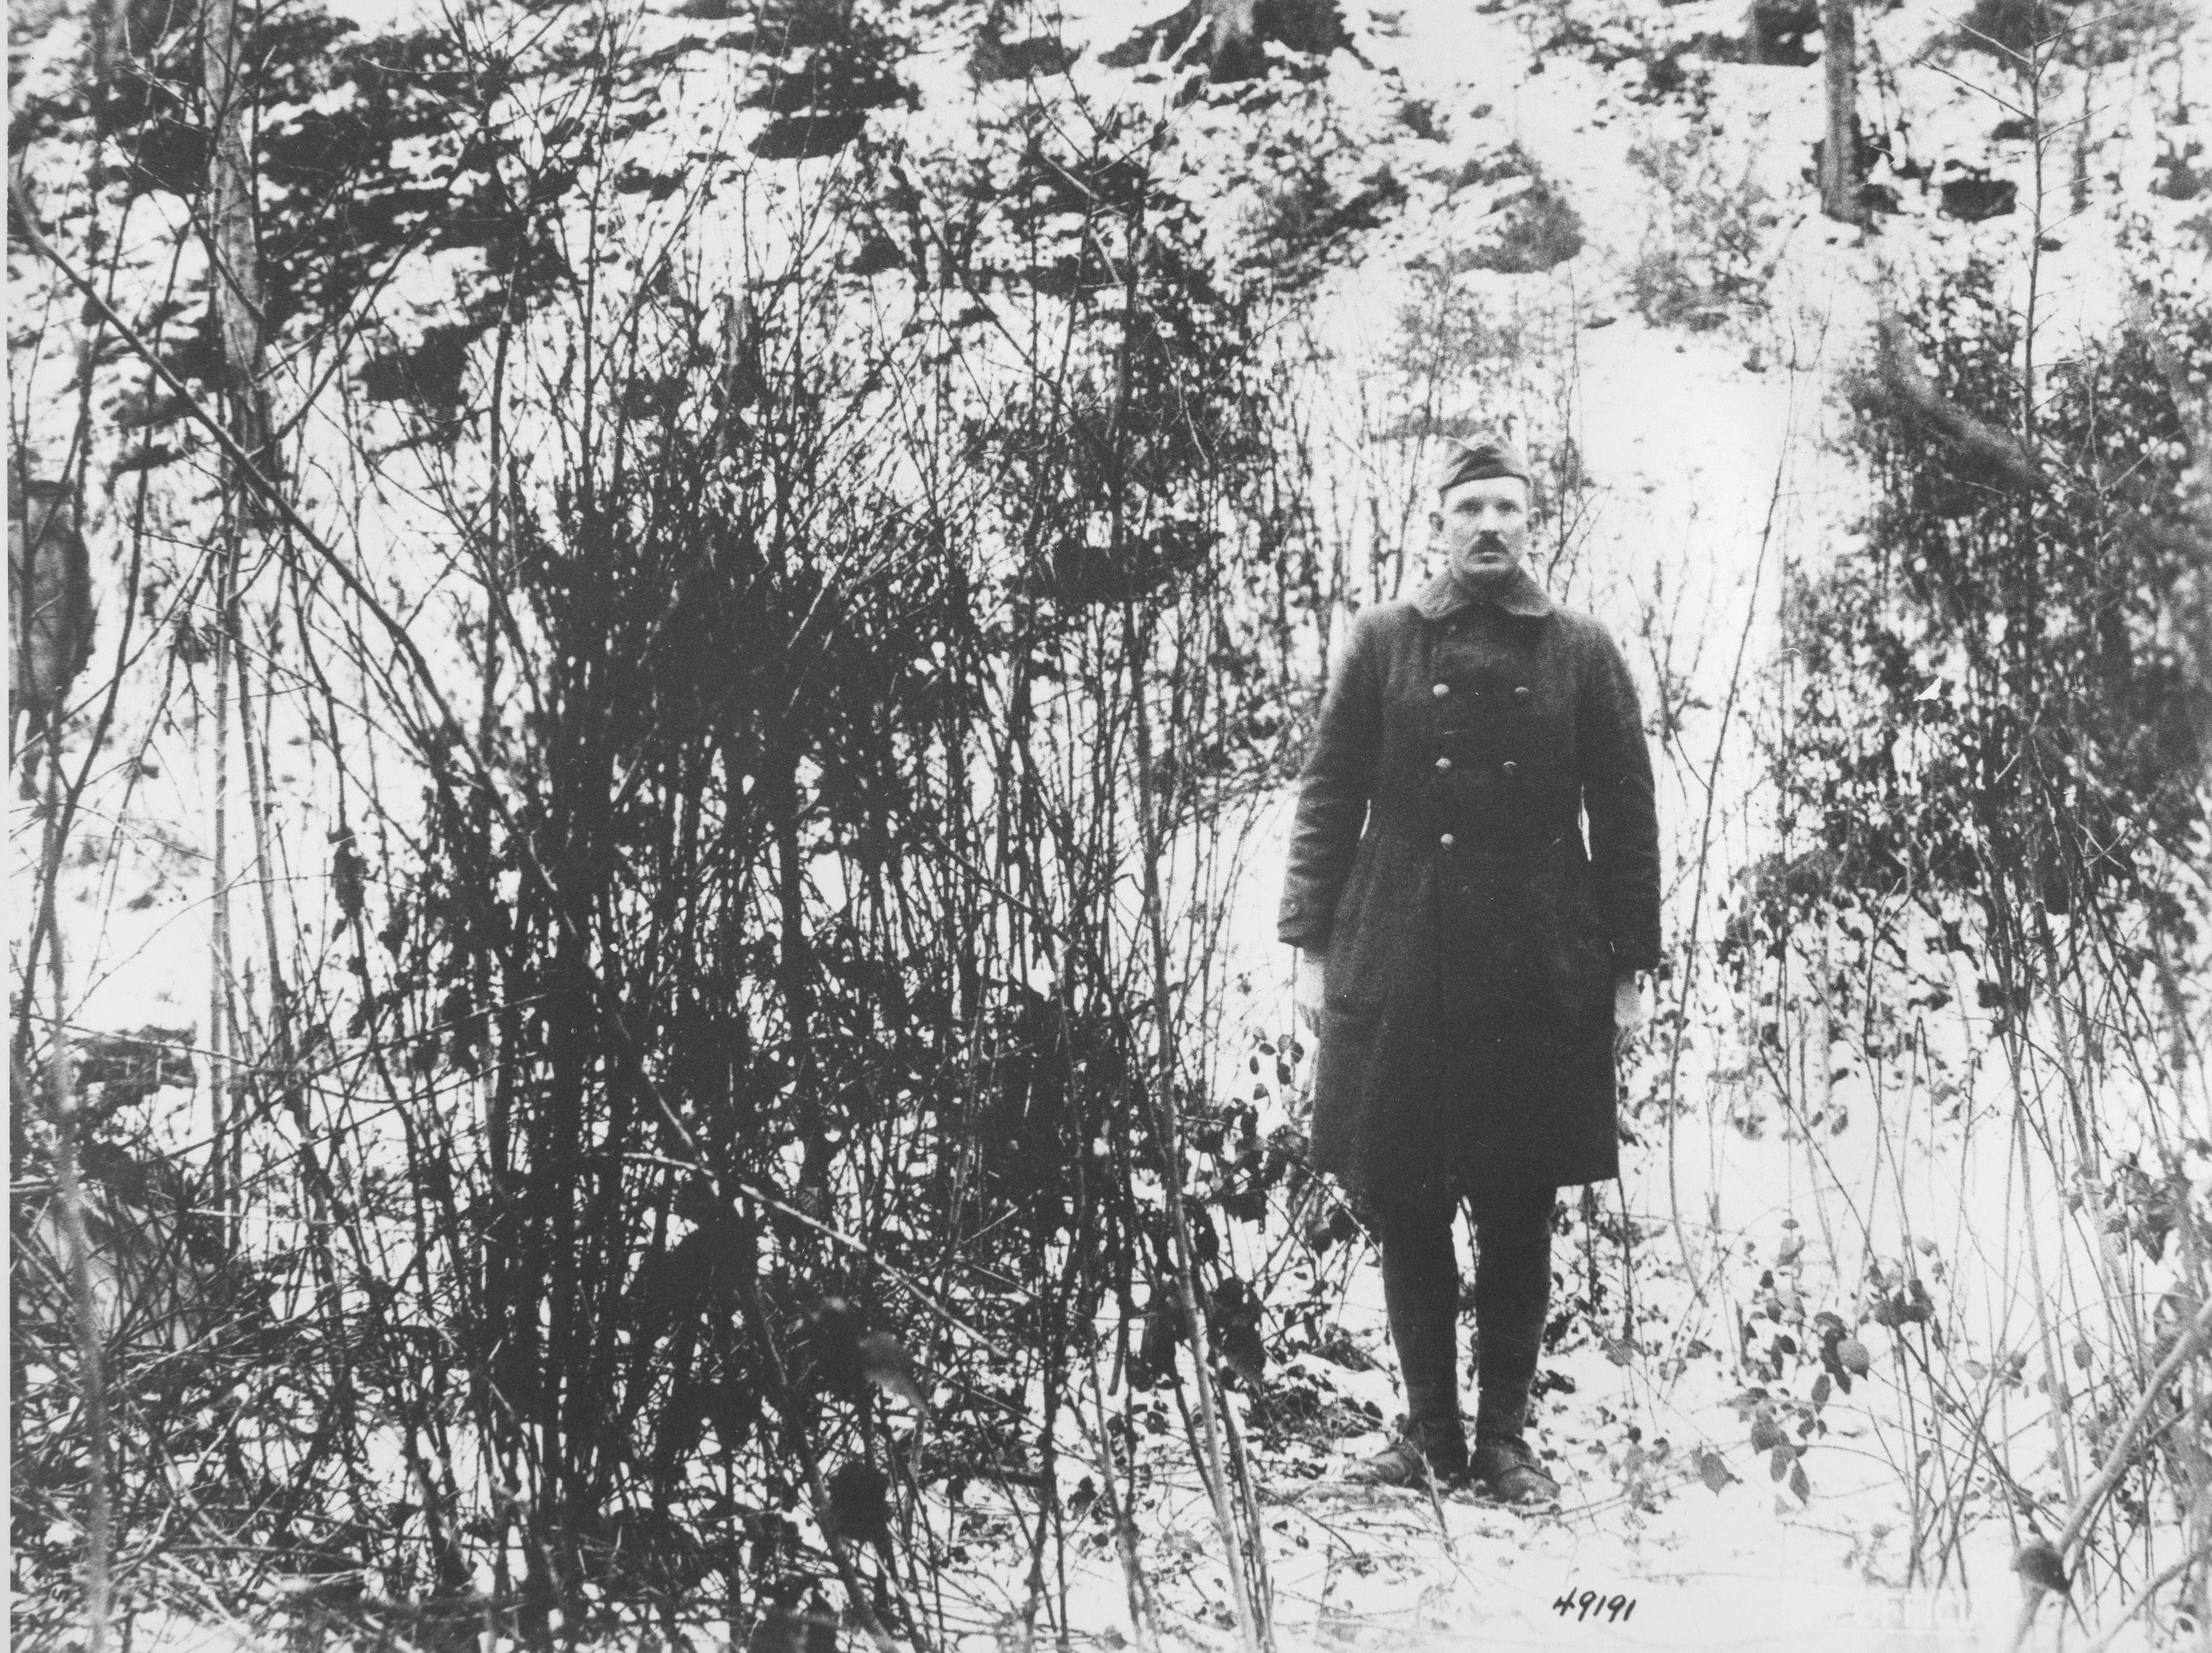 Sgt. Alvin York is seen in this undated photograph